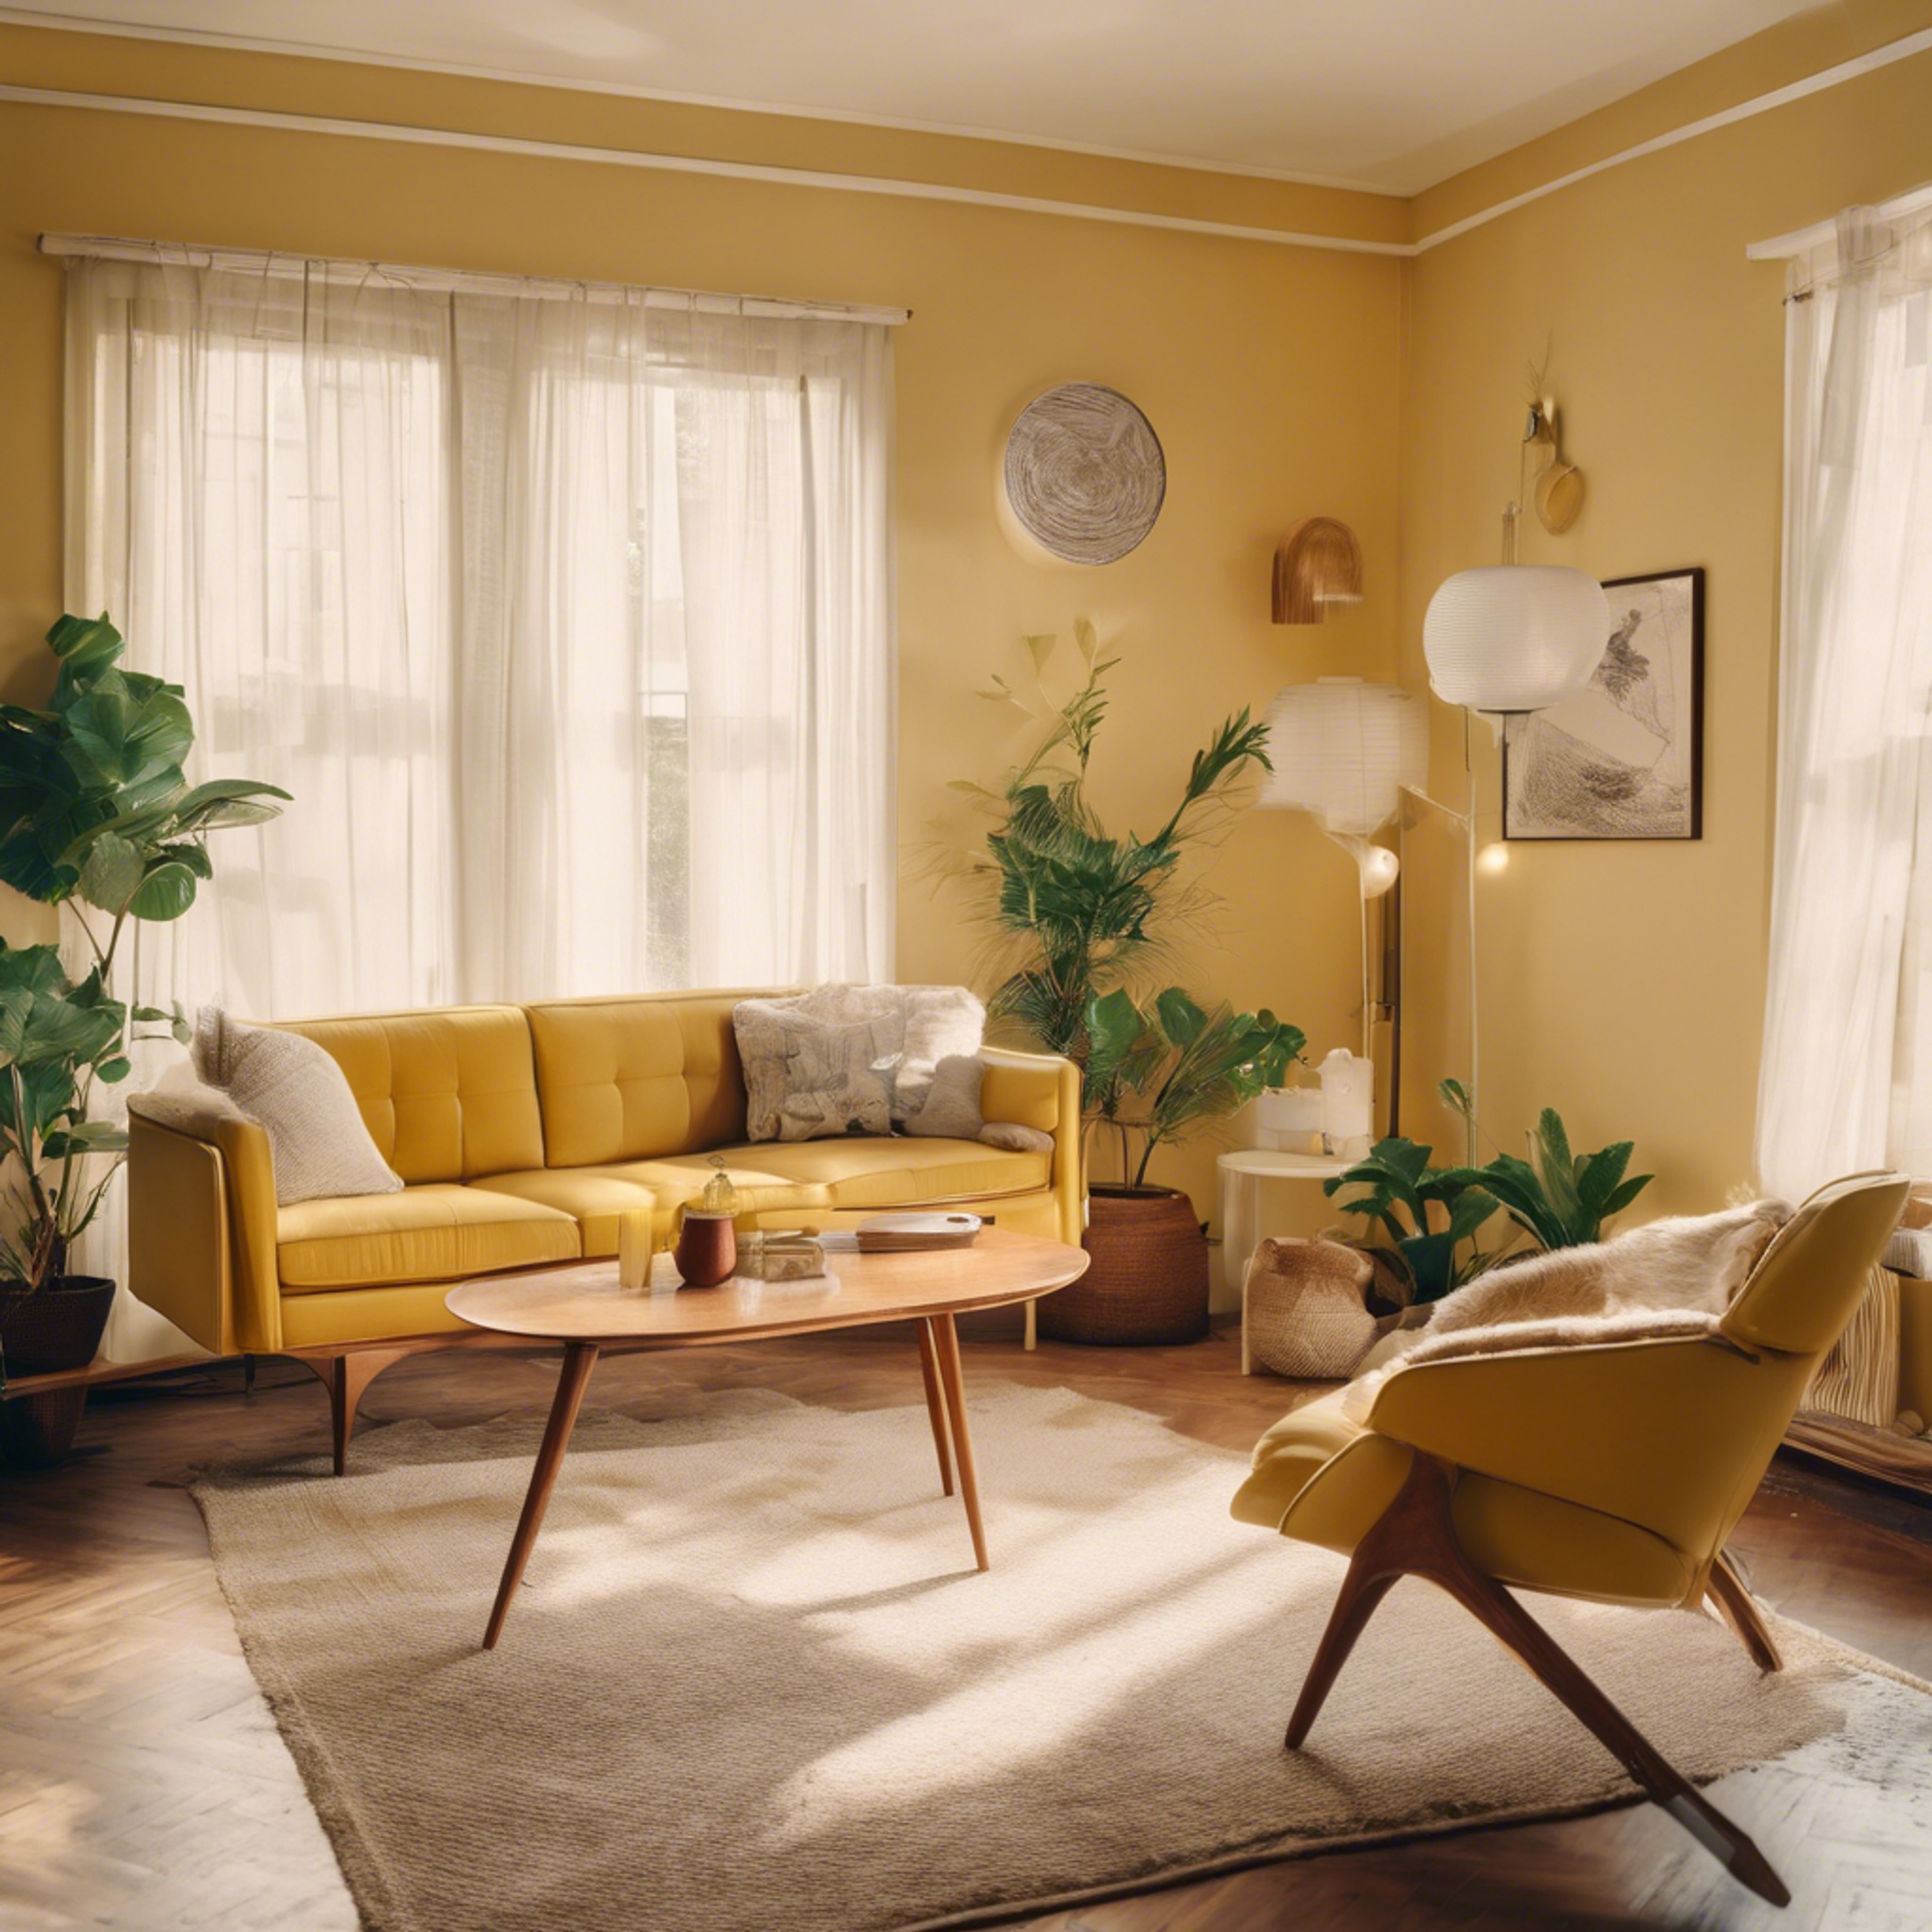 A mid-century modern living room with light yellow walls and retro furniture.壁紙[5118462dcdf043e4a164]